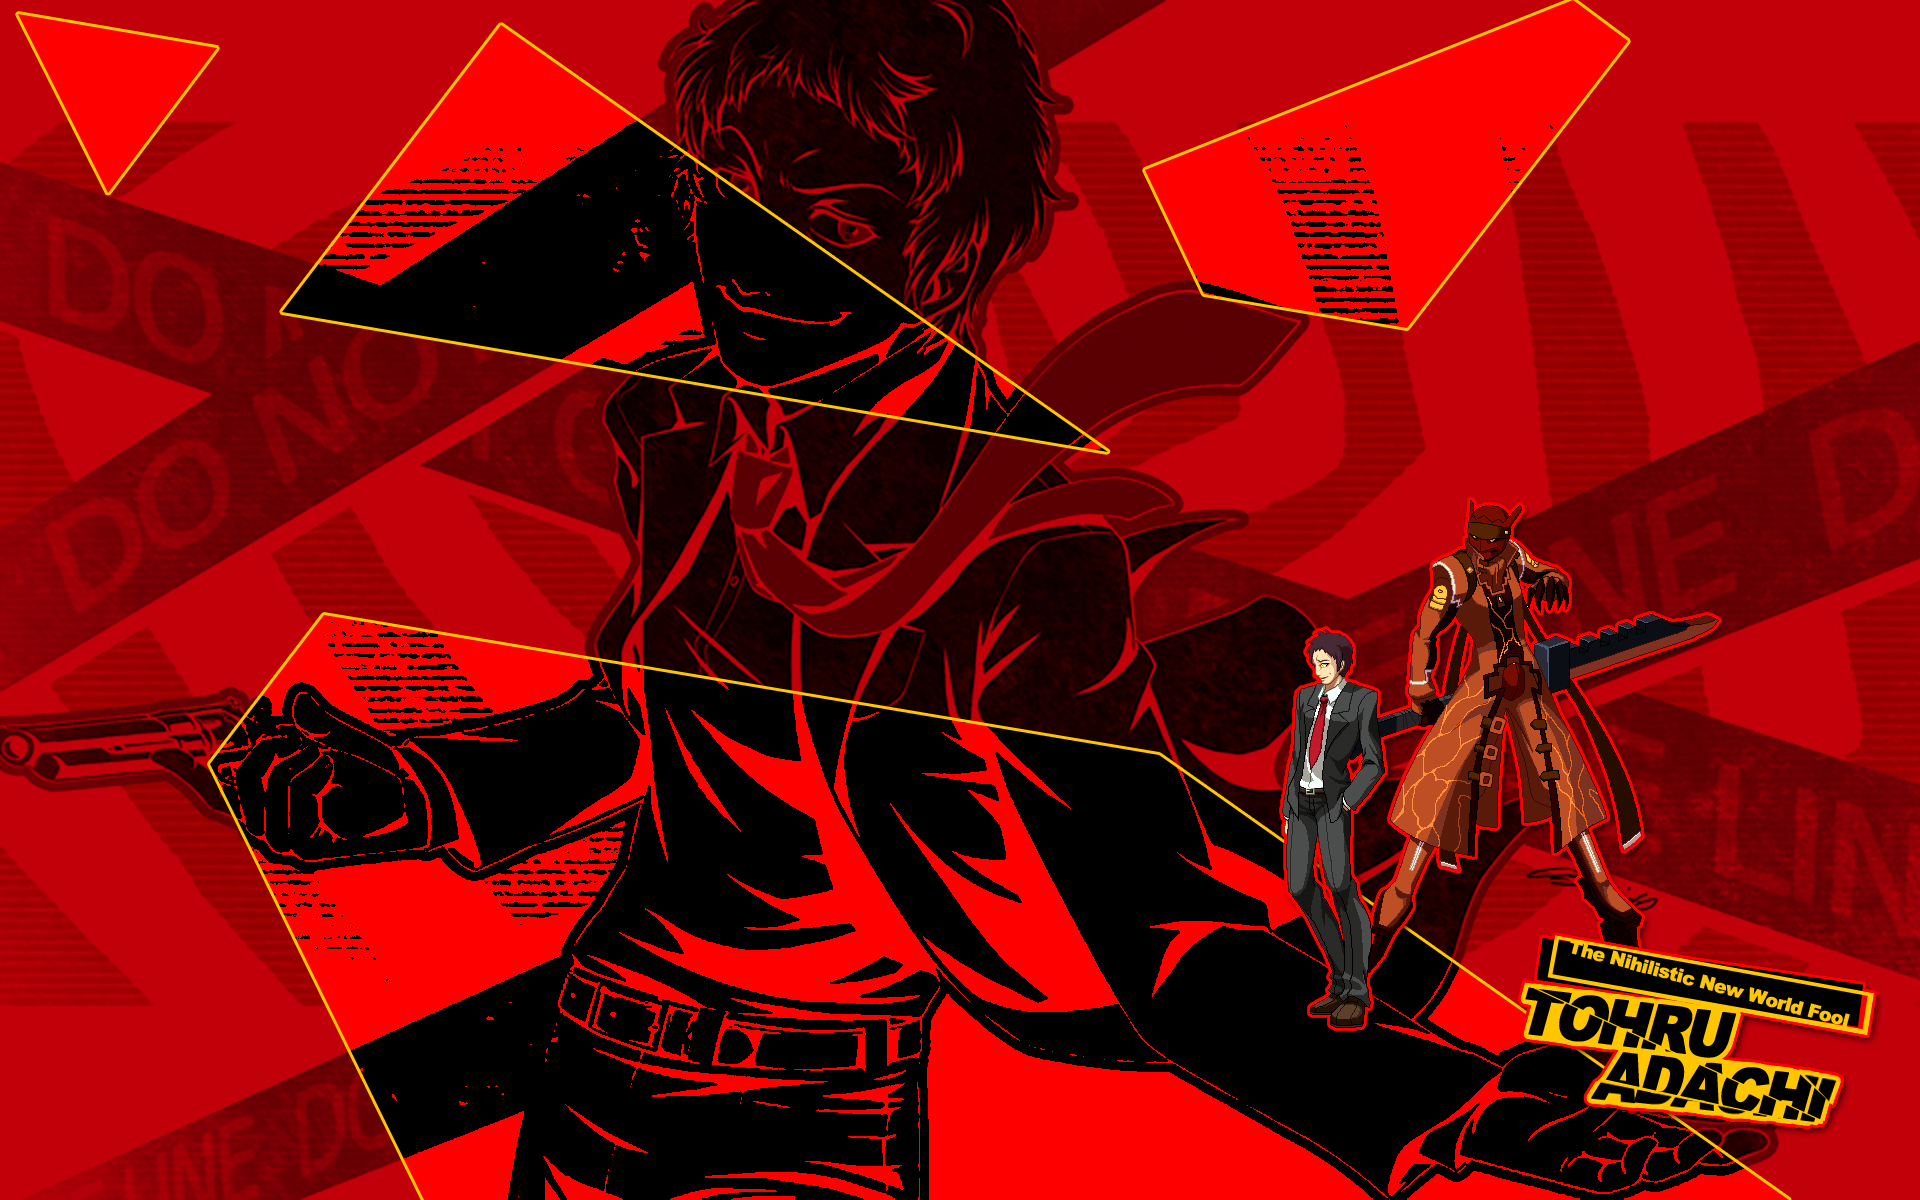 Free Download Adachi Persona 4 Uush Hd Wallpaper For Pc Ps3 By Seraharcana On 19x10 For Your Desktop Mobile Tablet Explore 48 Persona 4 Wallpaper Persona 4 Hd Wallpaper